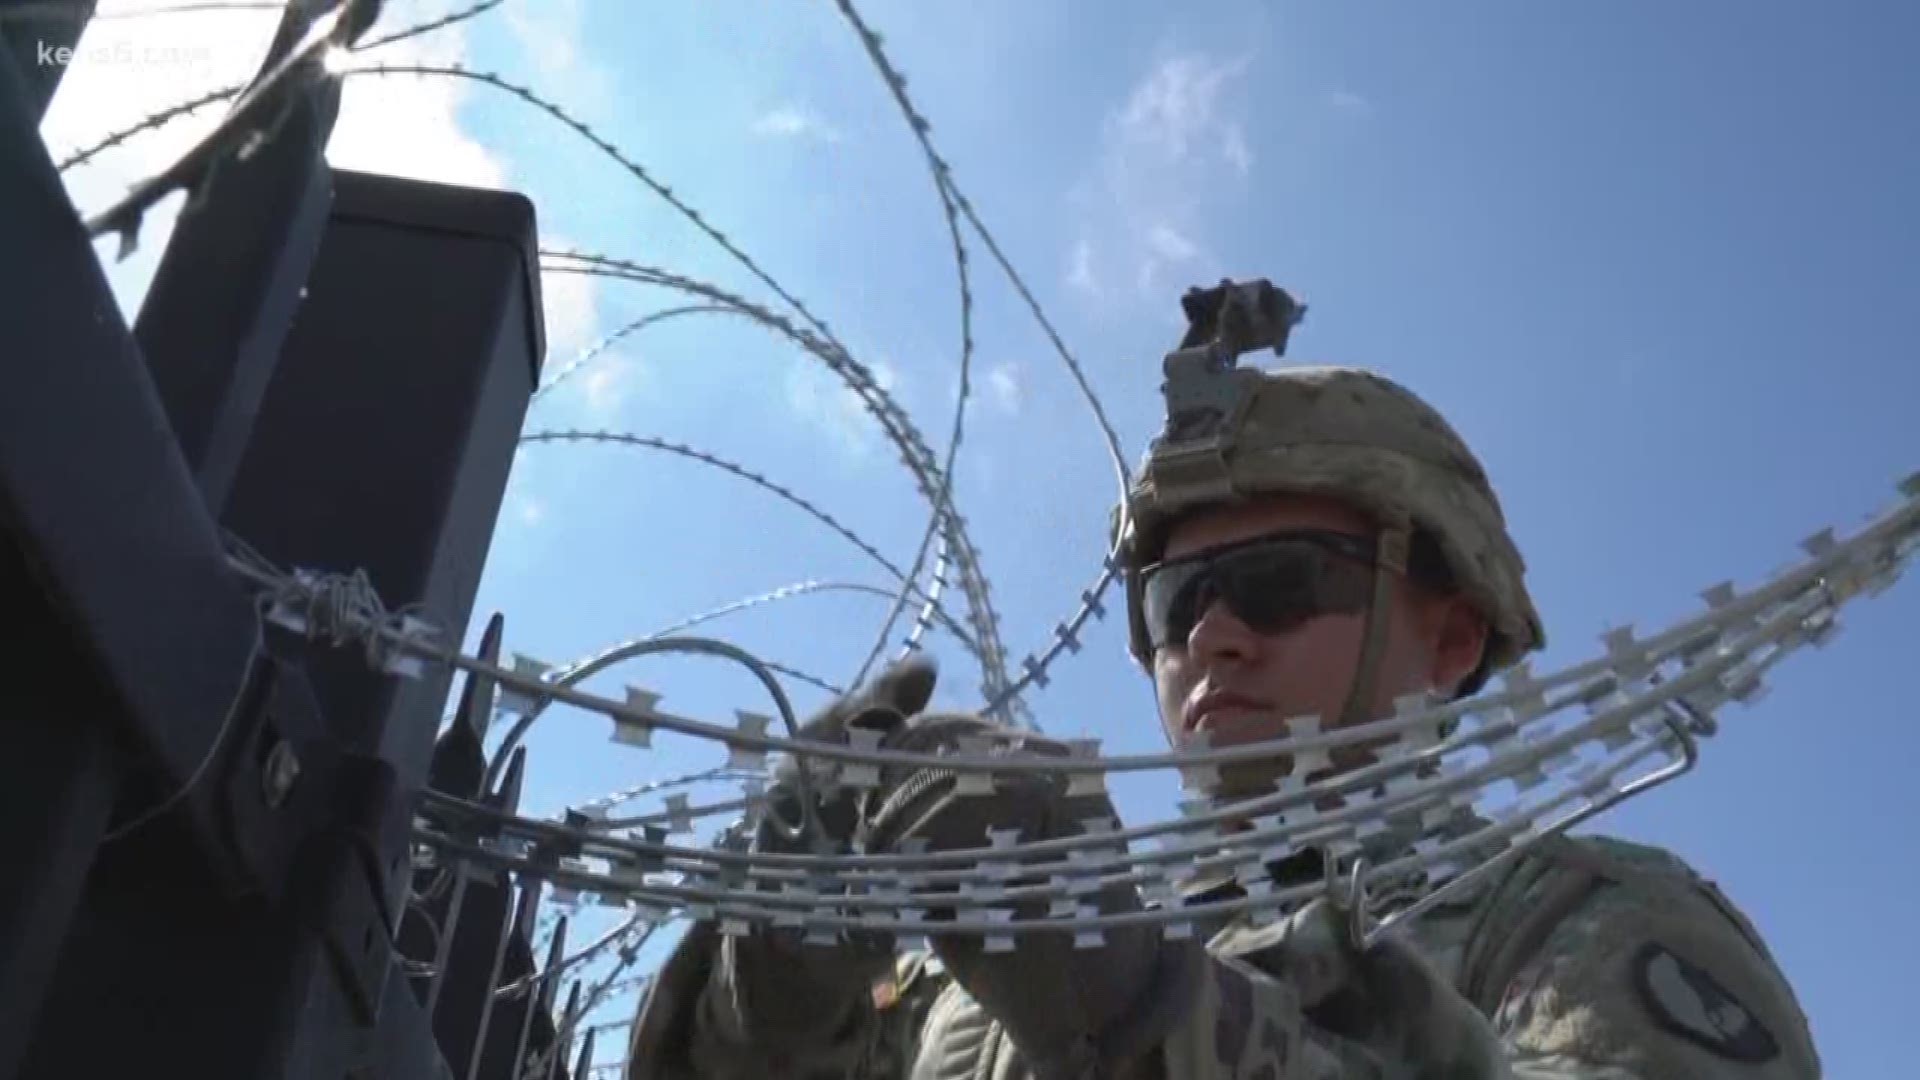 KENS 5's Luke Simons sat down with an Army lieutenant general to discuss how the military's response at the border is mainly to help border protection agents wherever they need it.